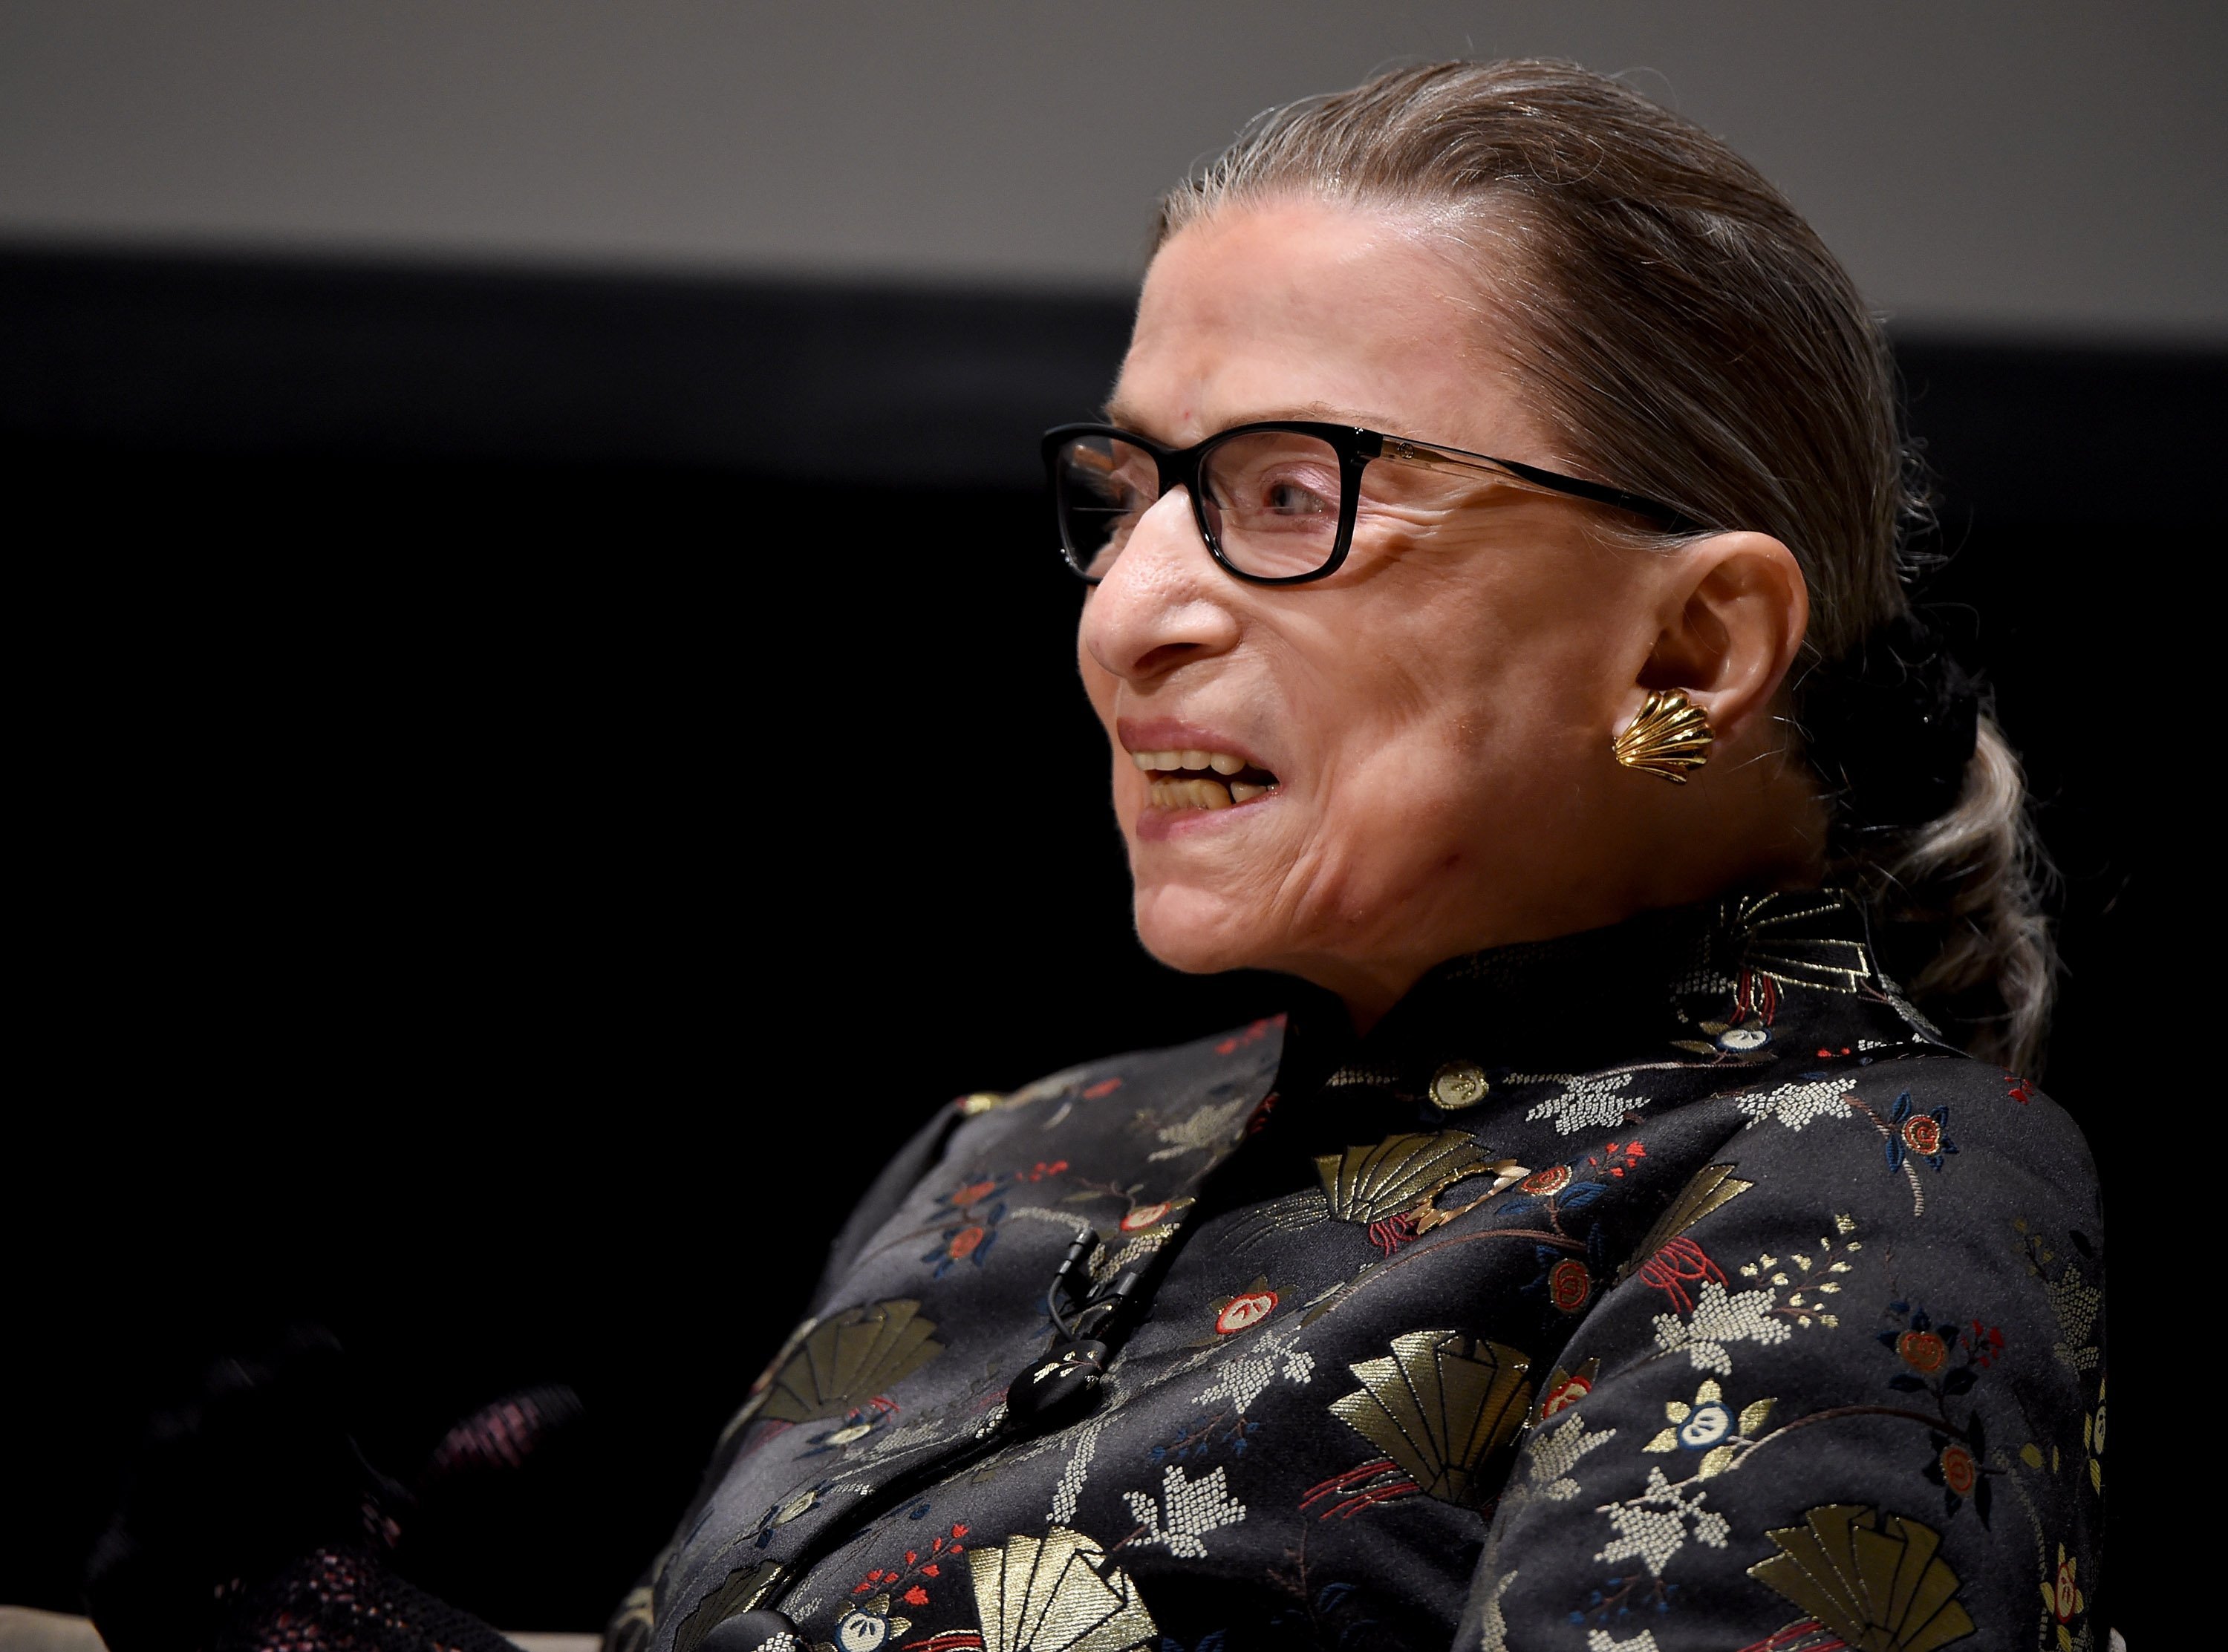 Supreme Court Justice Ruth Bader Ginsburg at 'An Historic Evening with Supreme Court Justice Ruth Bader Ginsburg' held at the Temple Emanu-El Skirball Center on September 21, 2016 in New York City | Photo: Getty Images